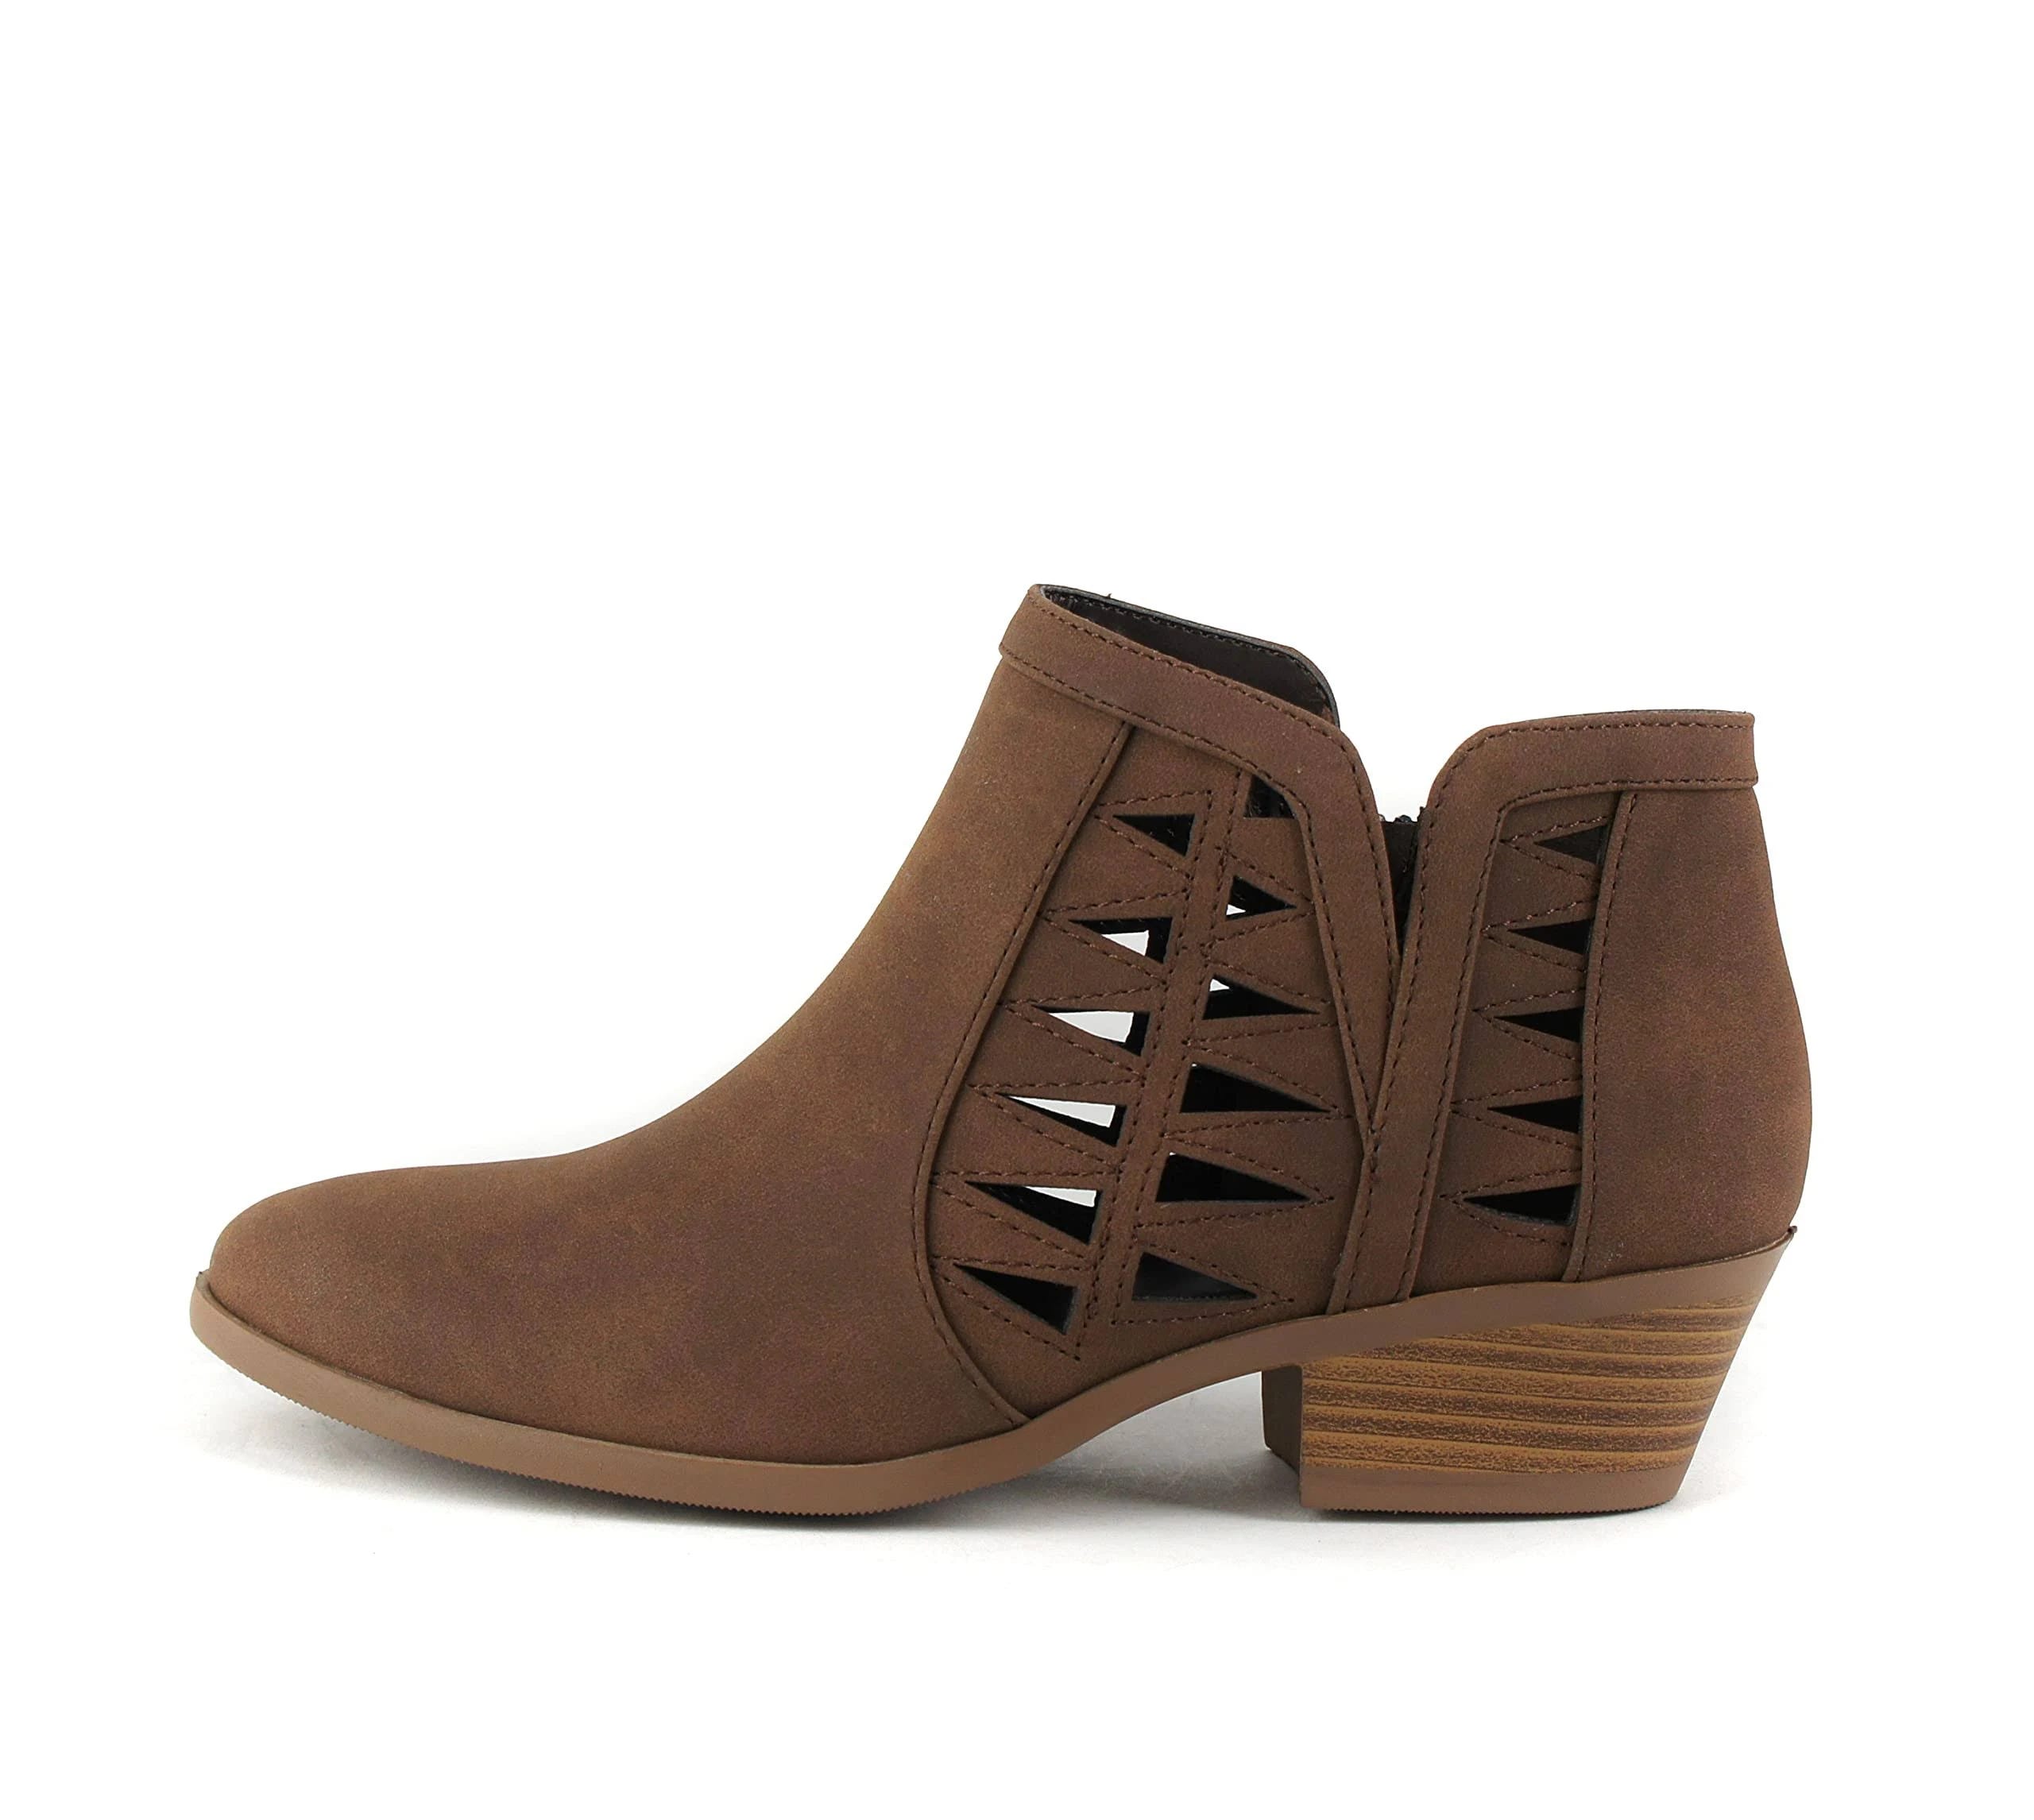 Light Brown Cut-Out Stacked Block Heel Ankle Booties for Style & Comfort | Image